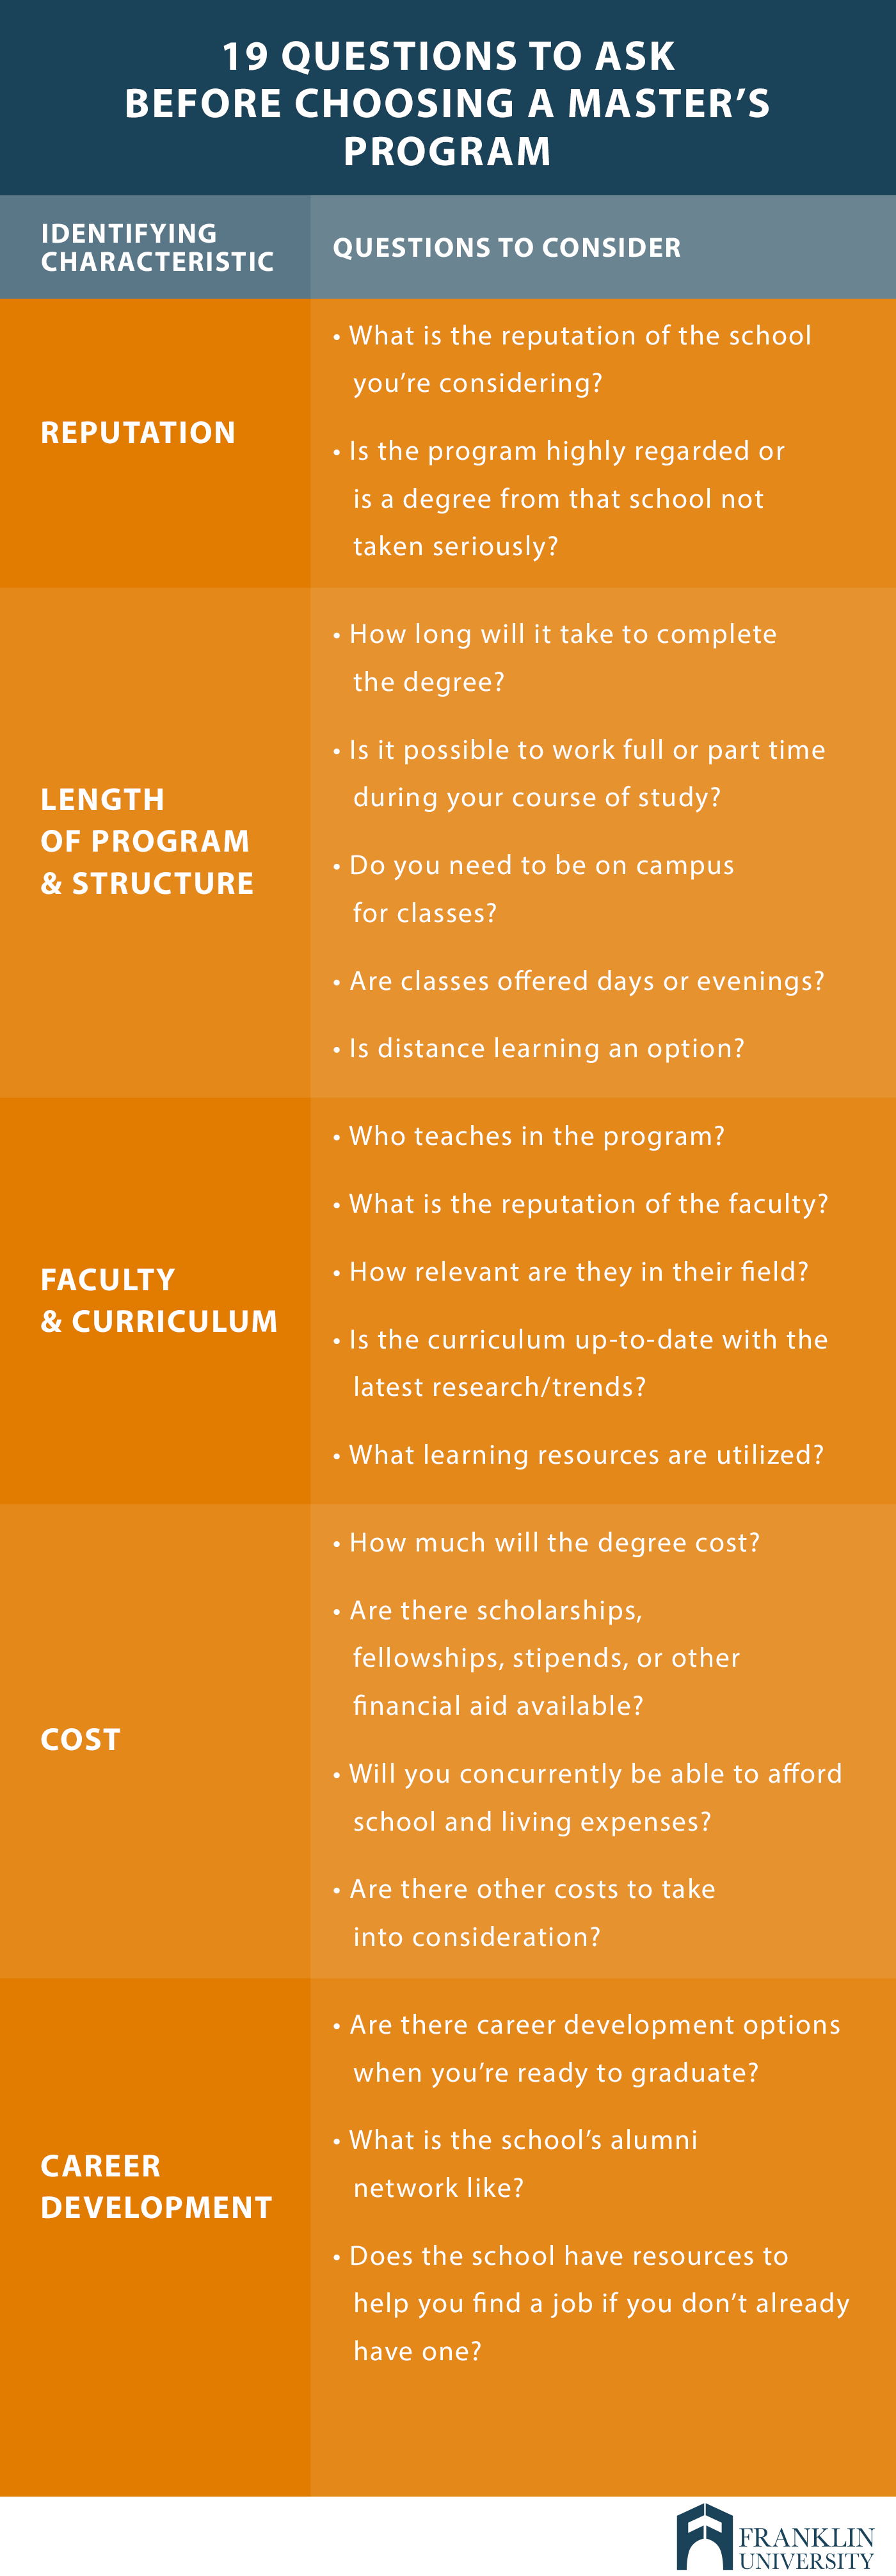 graphic describes 19 questions to ask before choosing a masters program